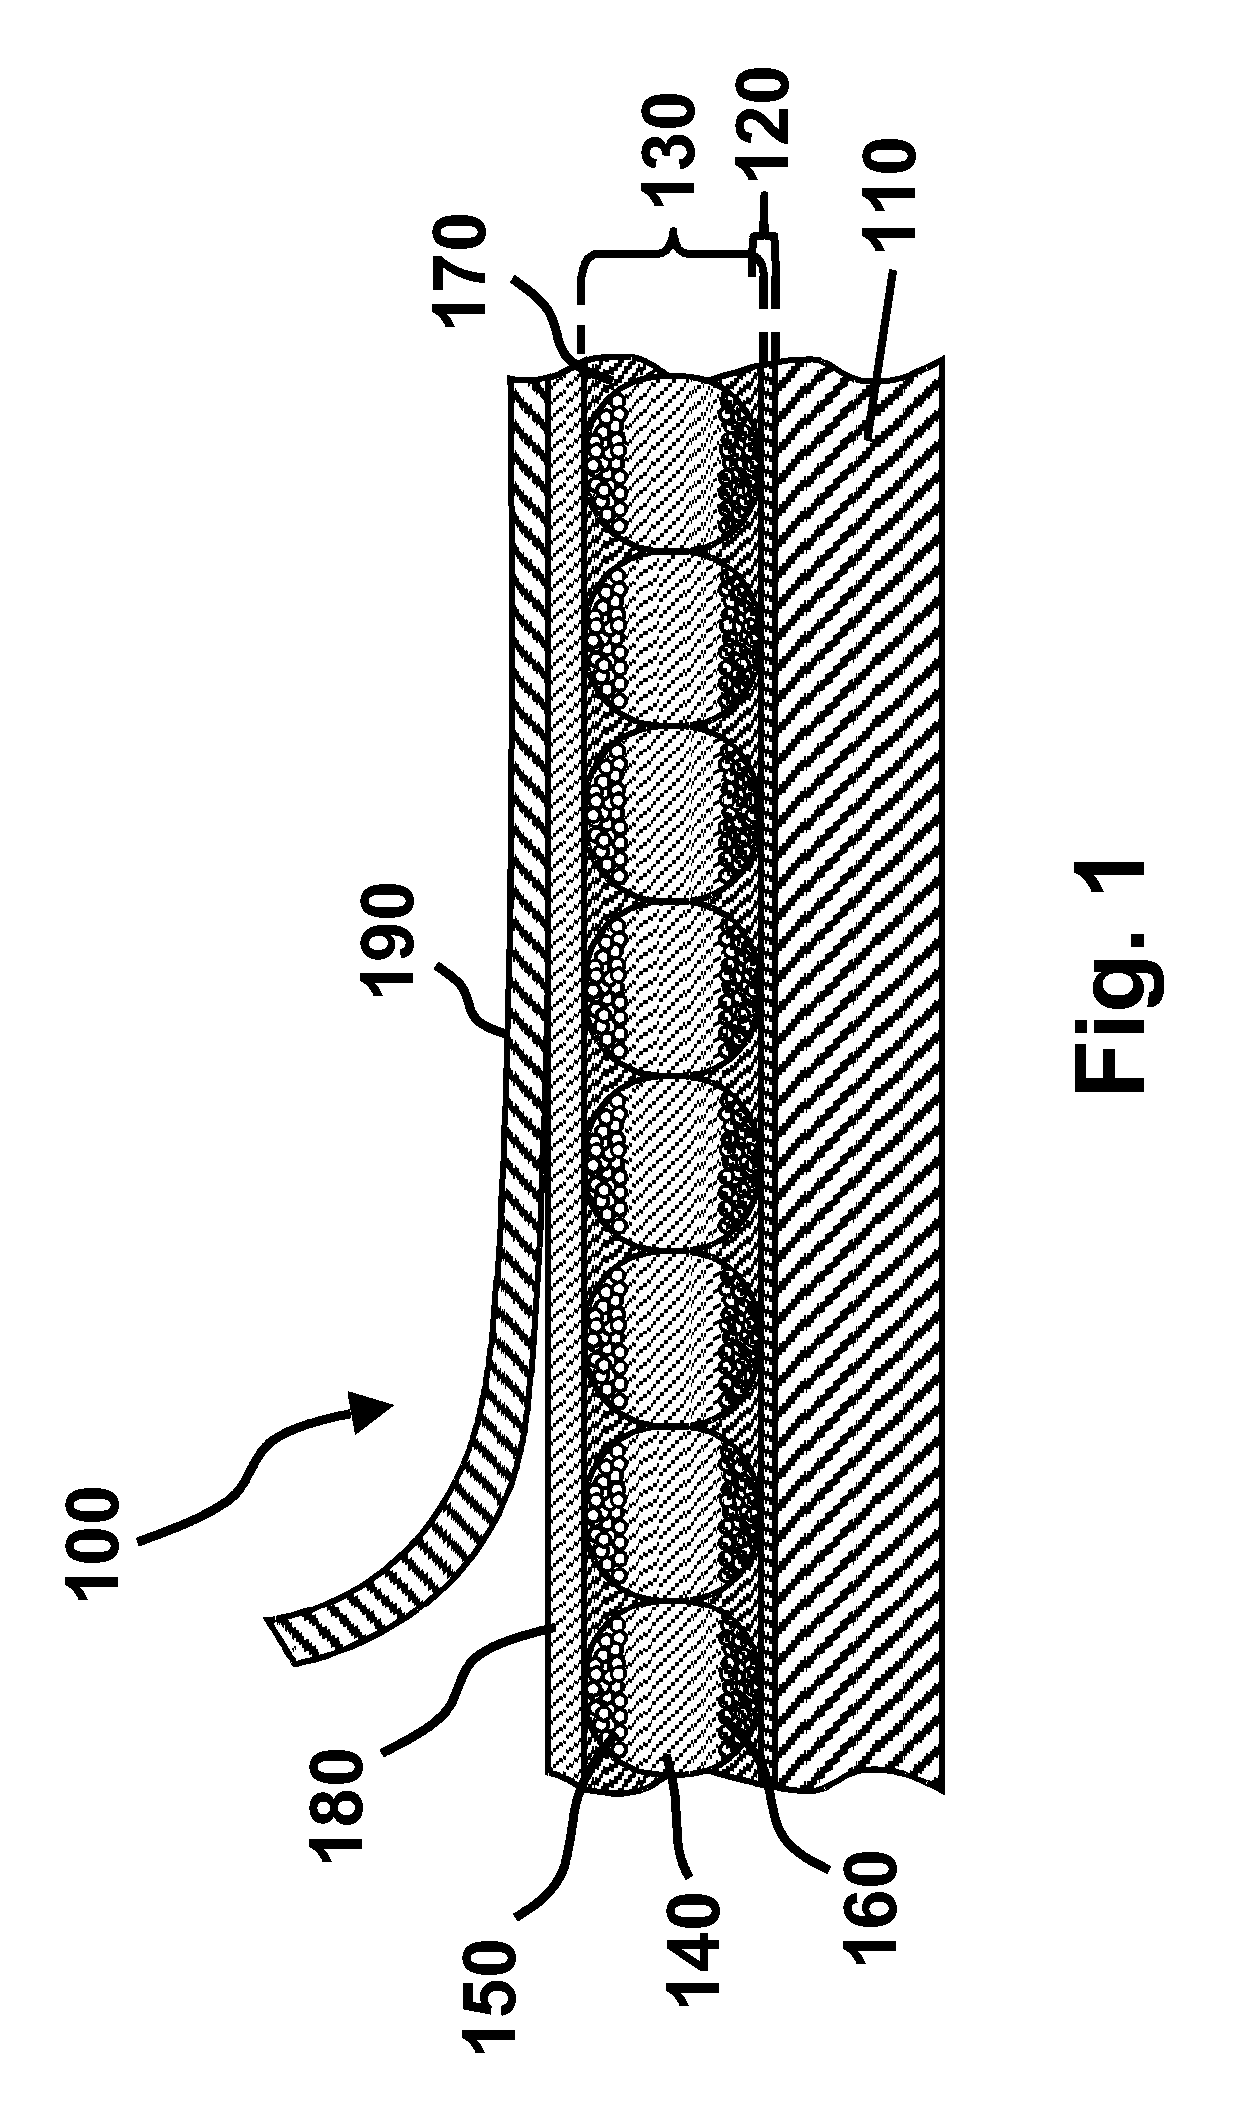 Electro-optic display and materials for use therein